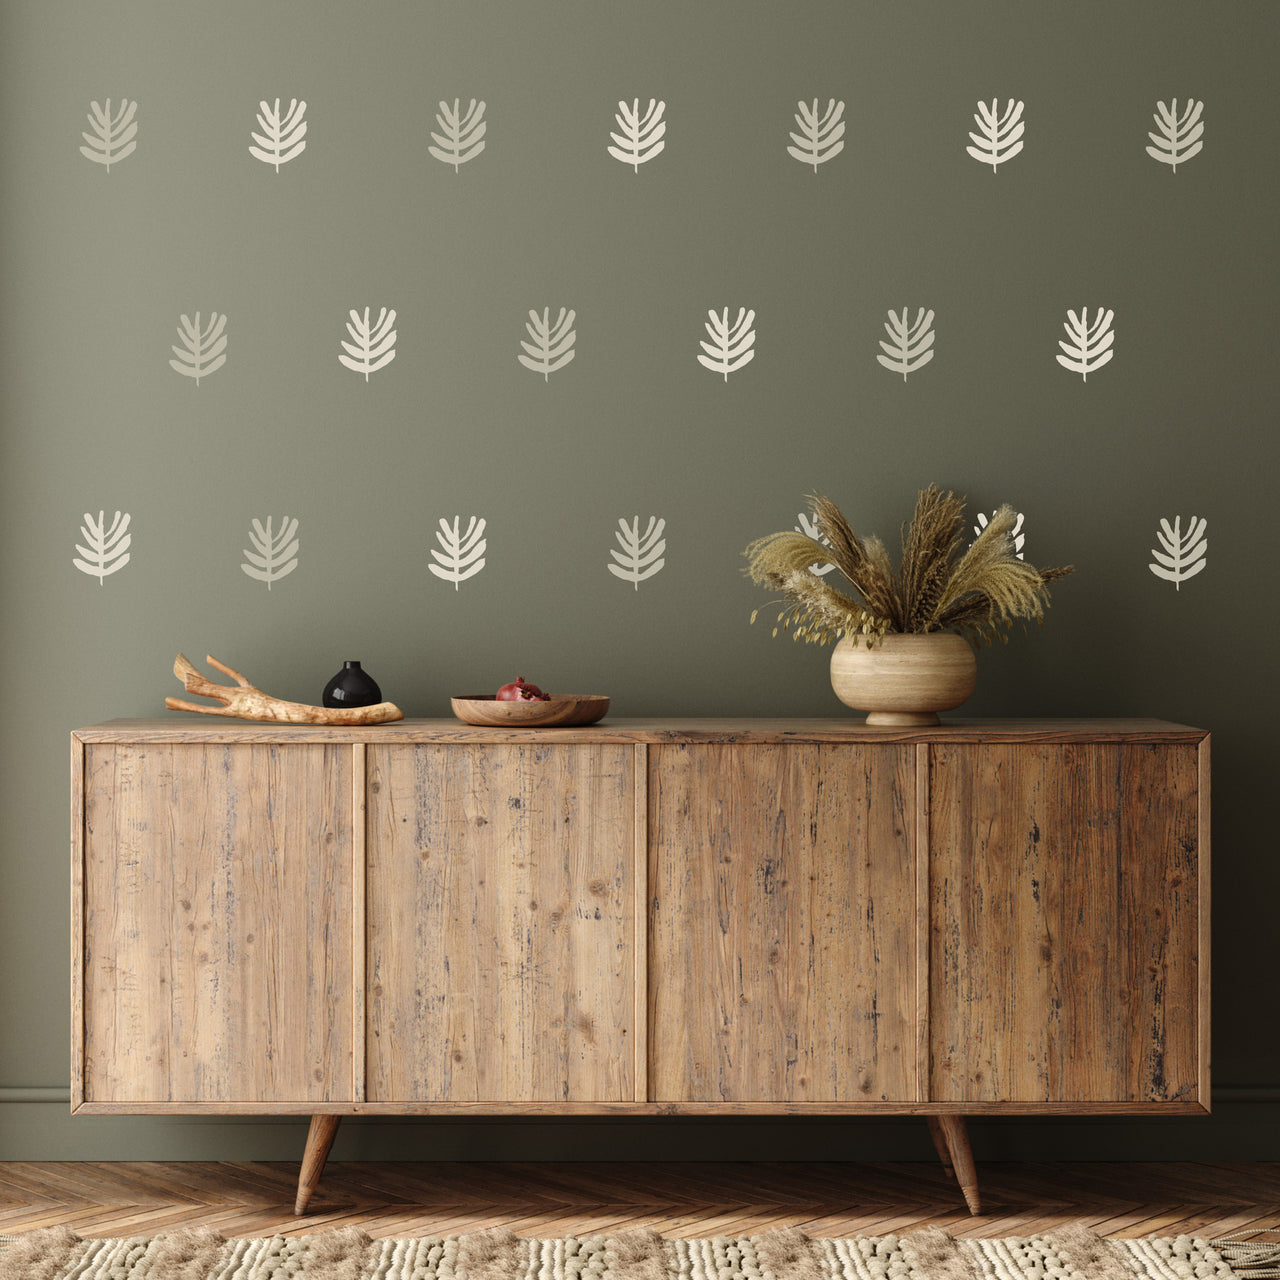 Little Leaf Wall Decals